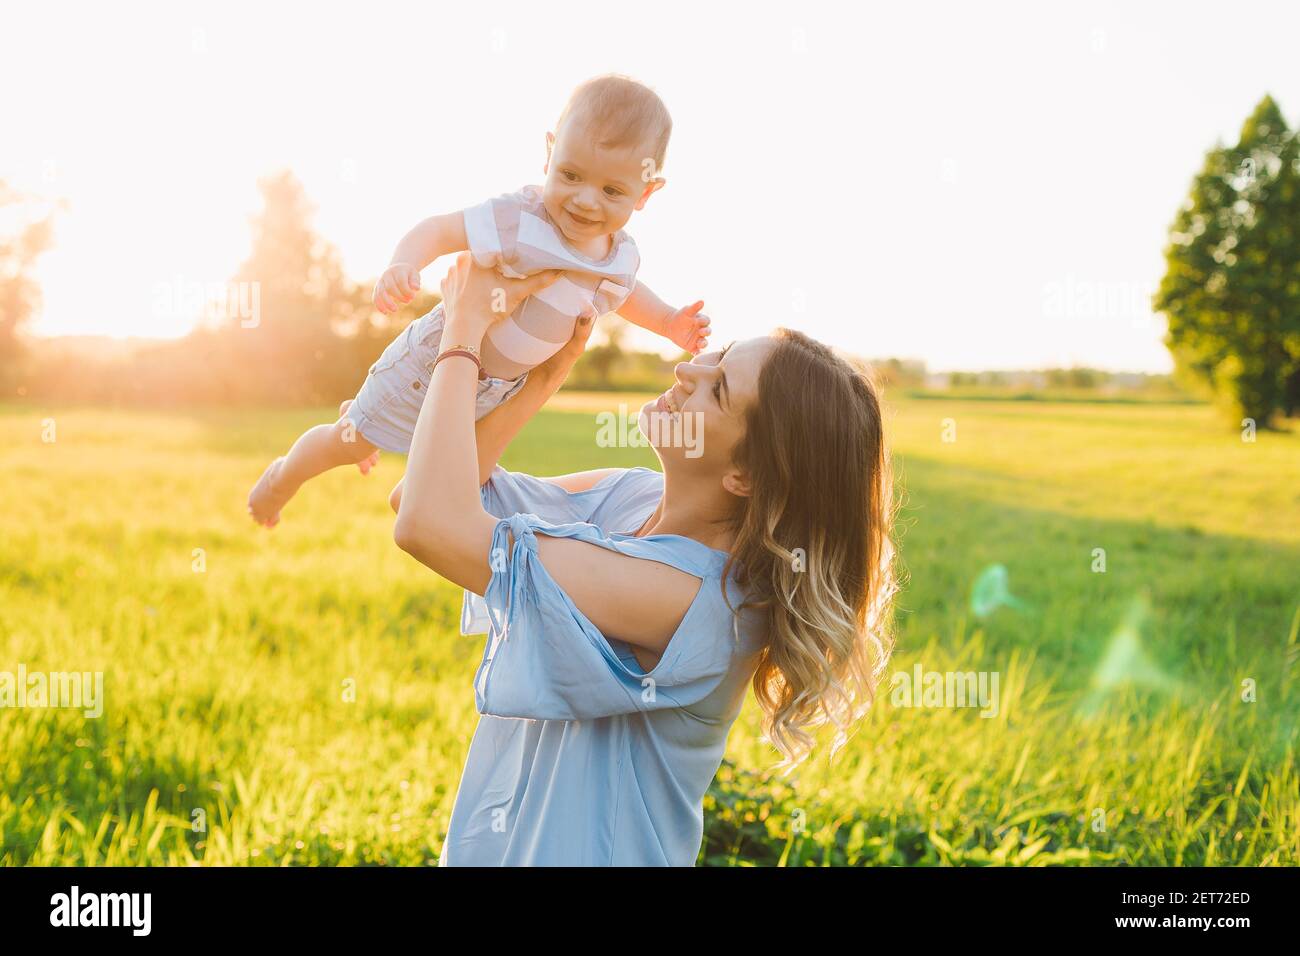 mom and son enjoying summer in the park relation concept caucasian Front or Back Yard play together sun light Stock Photo